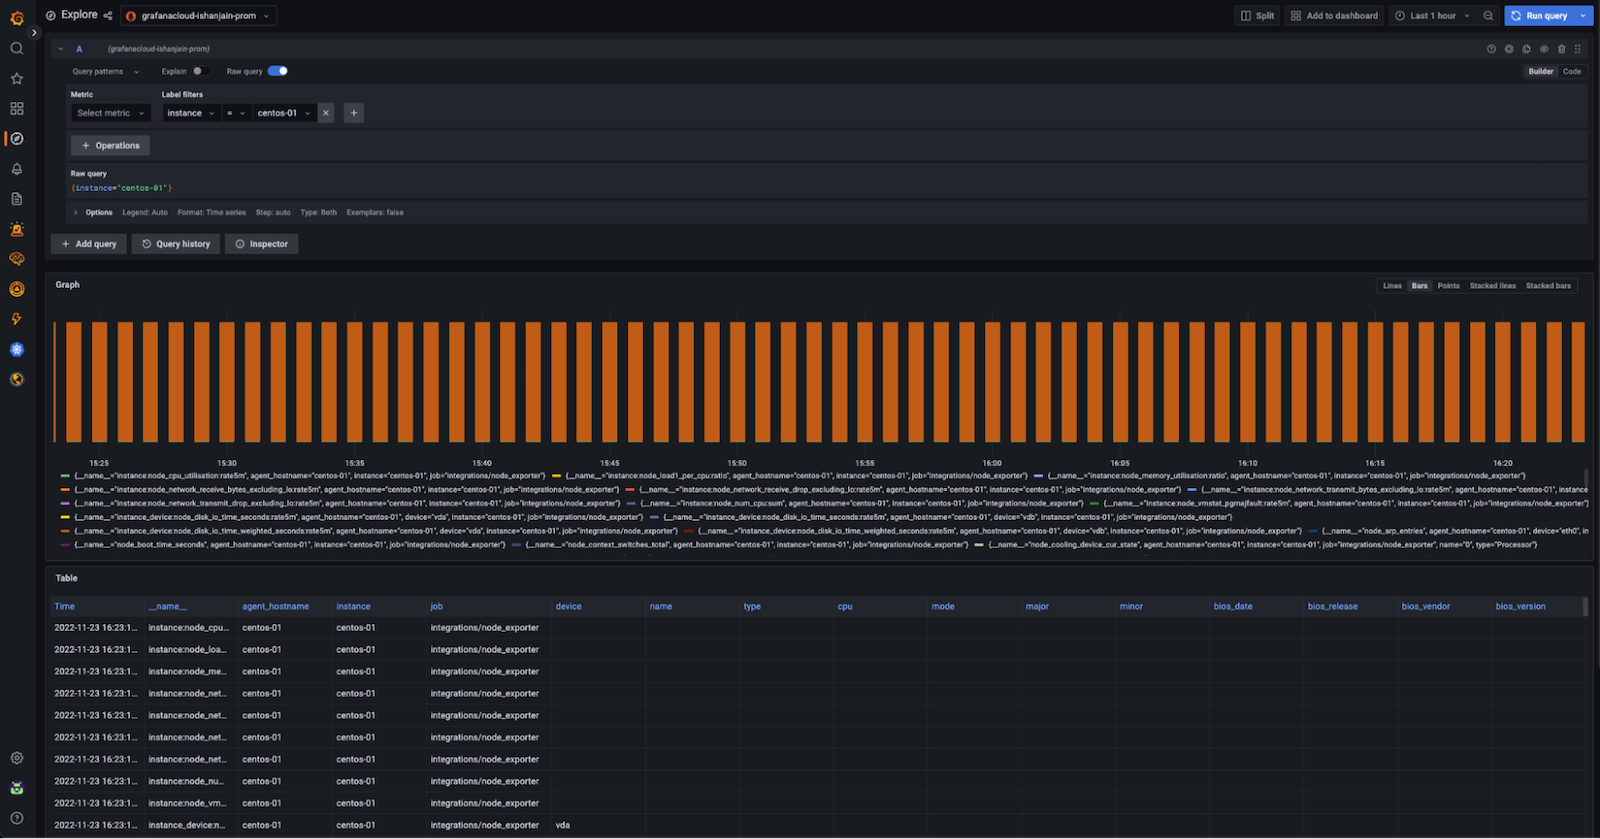 A Grafana dashboard showing an ingested instance